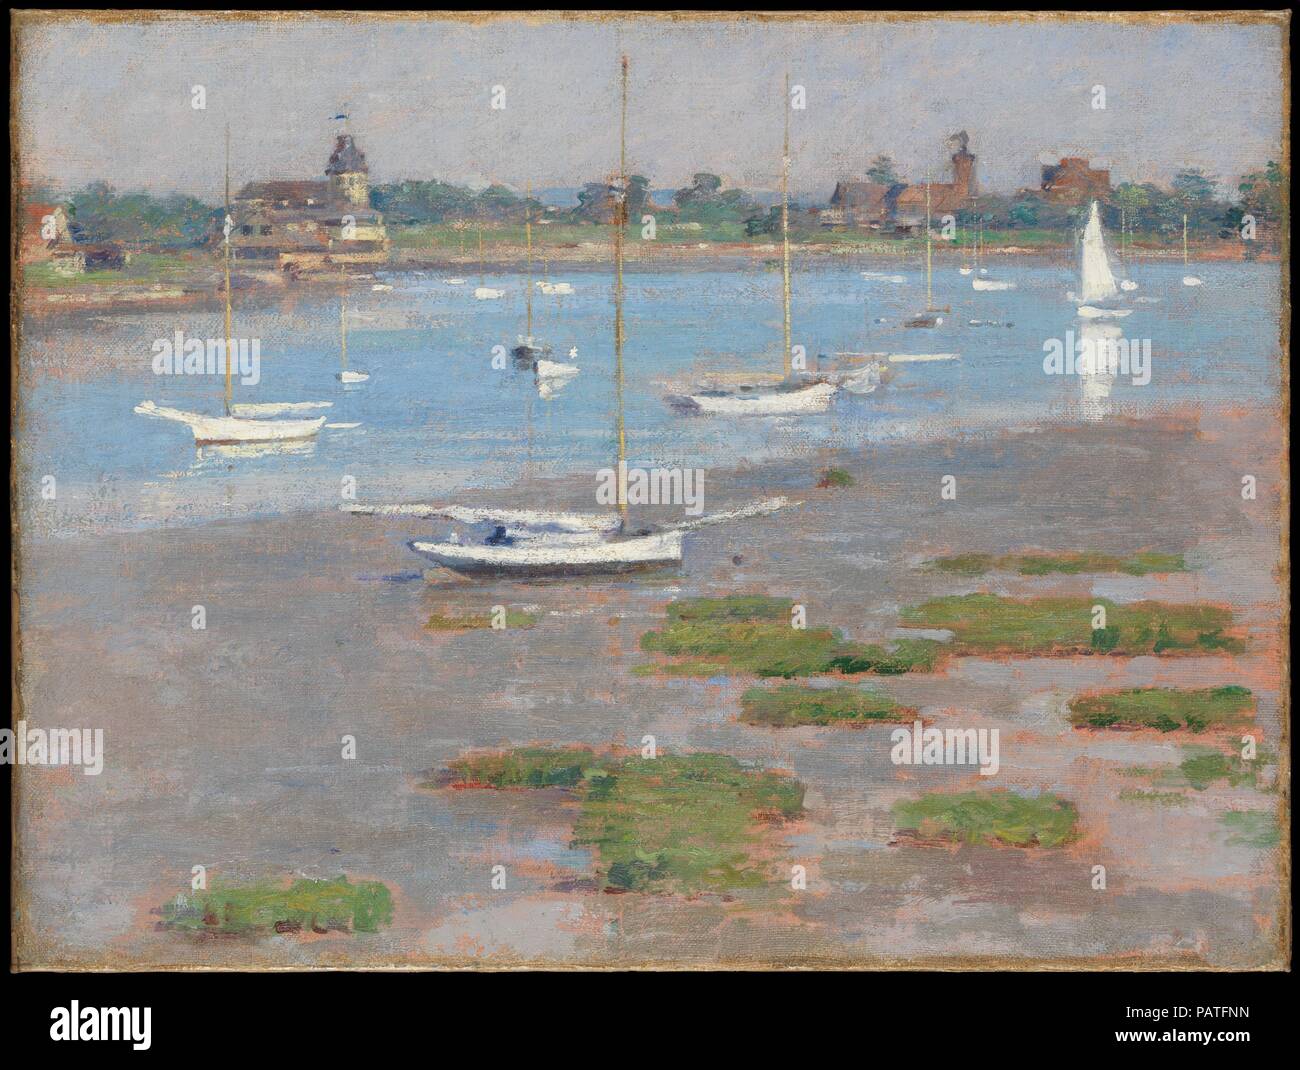 Low Tide, Riverside Yacht Club. Artist: Theodore Robinson (1852-1896). Dimensions: 18 x 24 in. (45.7 x 61 cm). Date: 1894.  This work is one of a series of coastal scenes painted by Theodore Robinson at Cos Cob, Connecticut, a popular American artists' colony. It reveals how the painter synthesized the earlier influence of Claude Monet with a newfound interest in Japanese prints. As Robinson observed after acquiring his first print in 1894, 'My Japanese print points in a direction I must try and take: an aim for refinement and a kind of precision seen in the best old as well as modern work.'.  Stock Photo